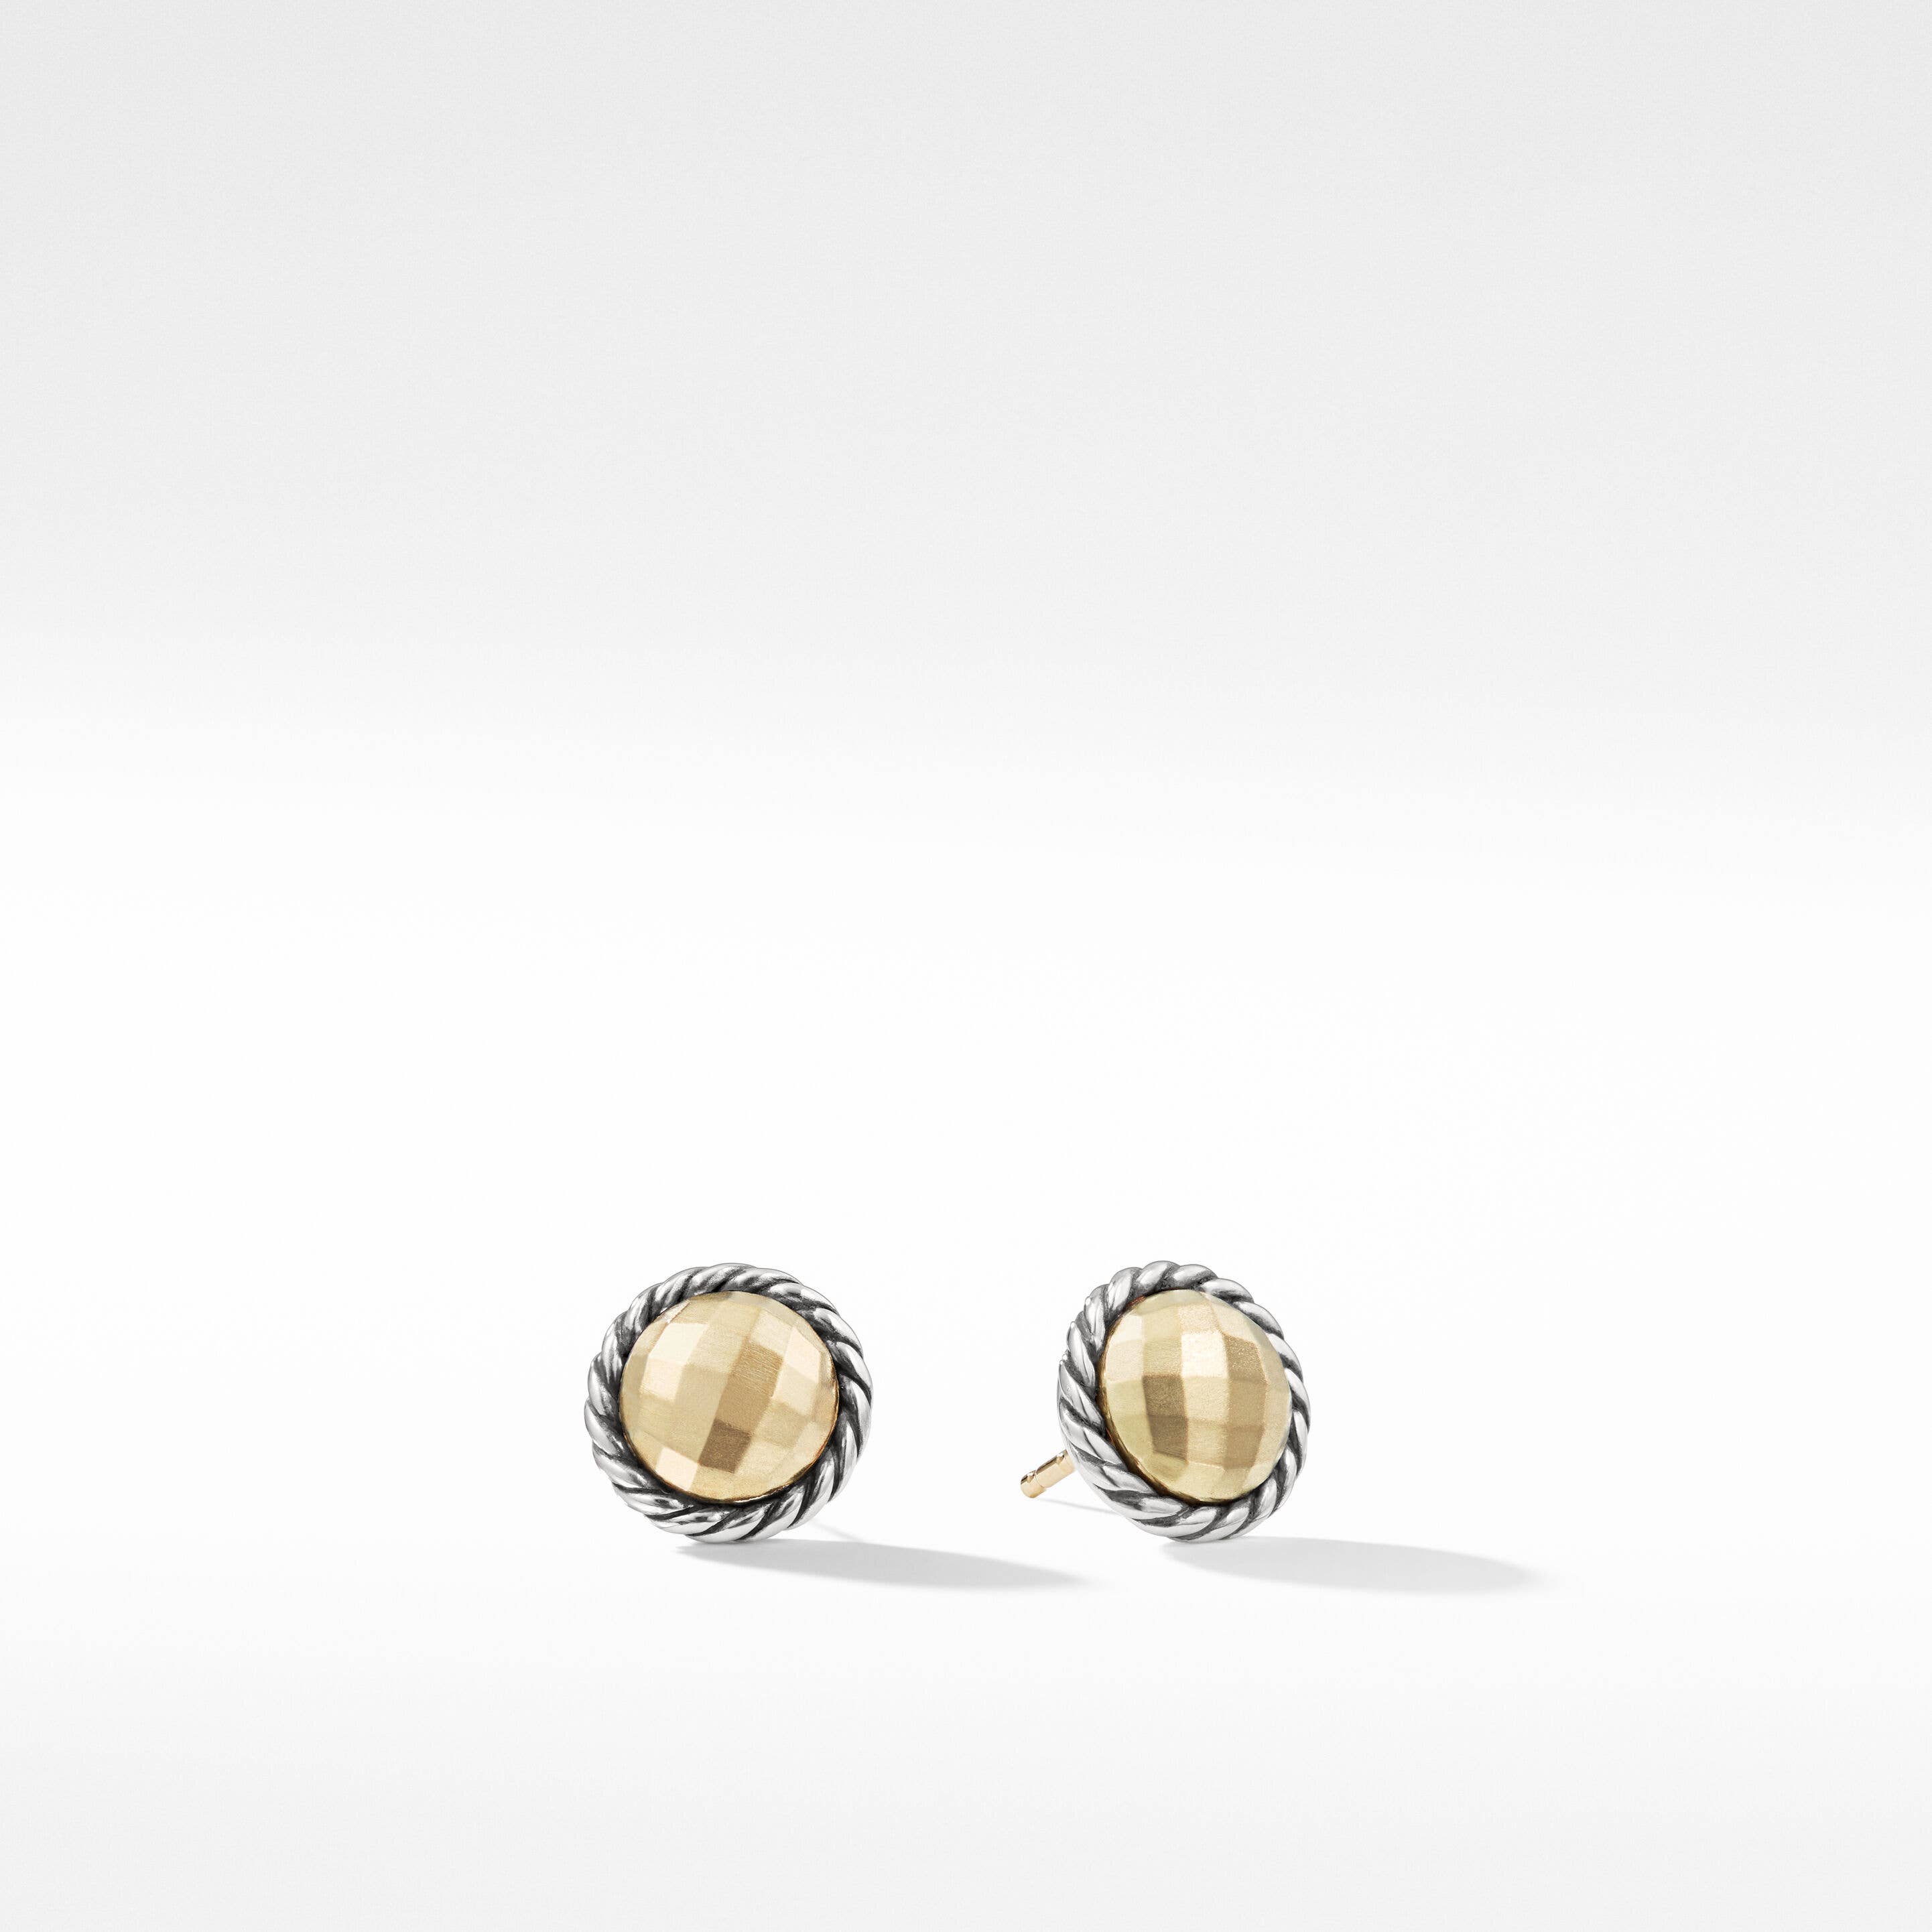 Petite Chatelaine® Stud Earrings with 18K Yellow Gold Domes